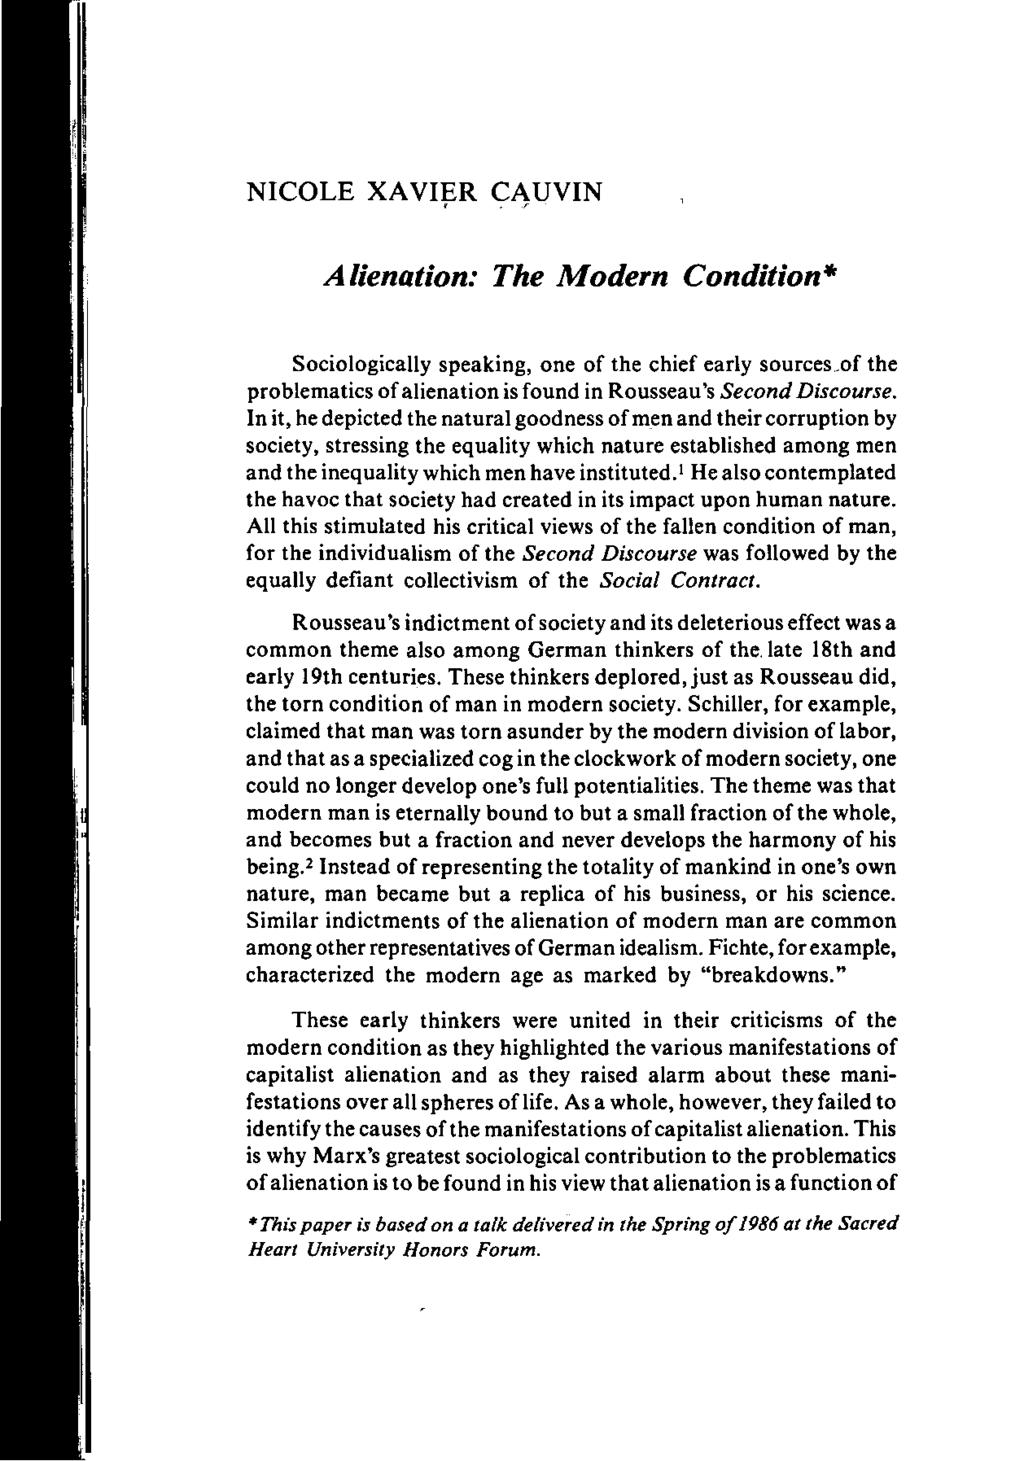 Cauvin: Alienation: The Modern Condition NICOLE XAVIER CAUVIN Alienation: The Modern Condition* Sociologically speaking, one of the chief early sources,of the problematics of alienation is found in